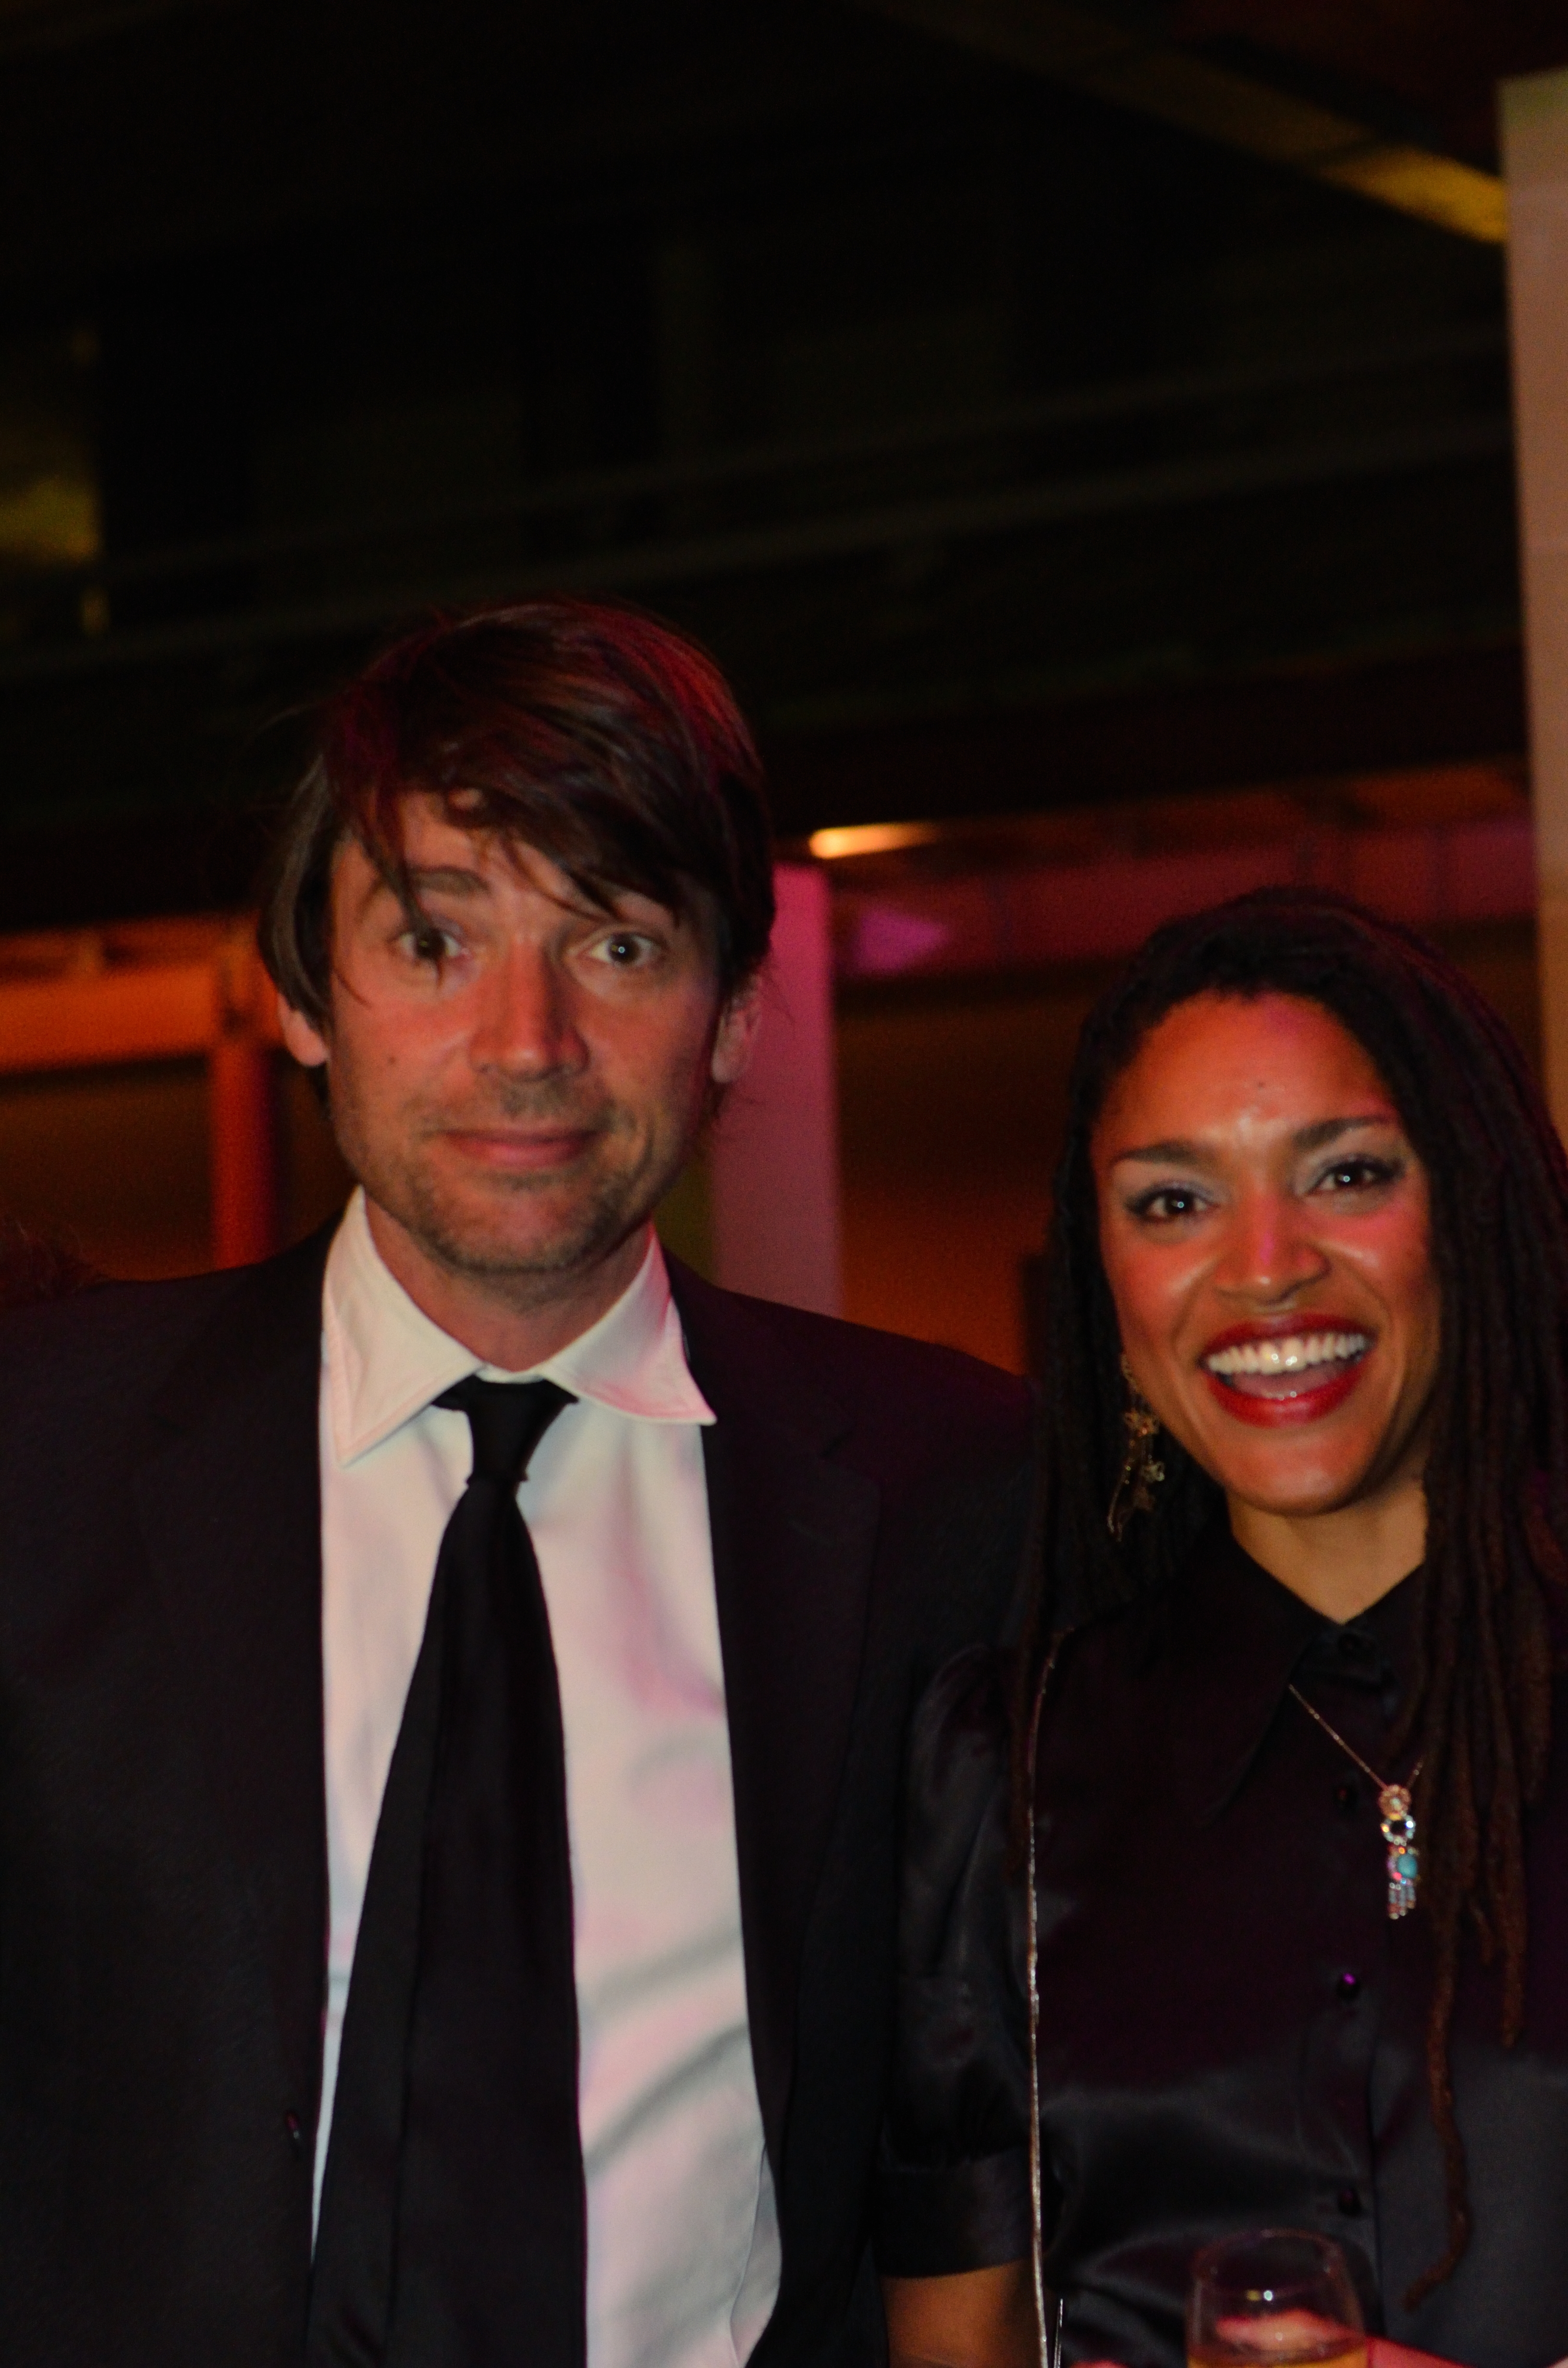 Kerri McLean photographed with Alex James at The GQ Man of the Year Awards.